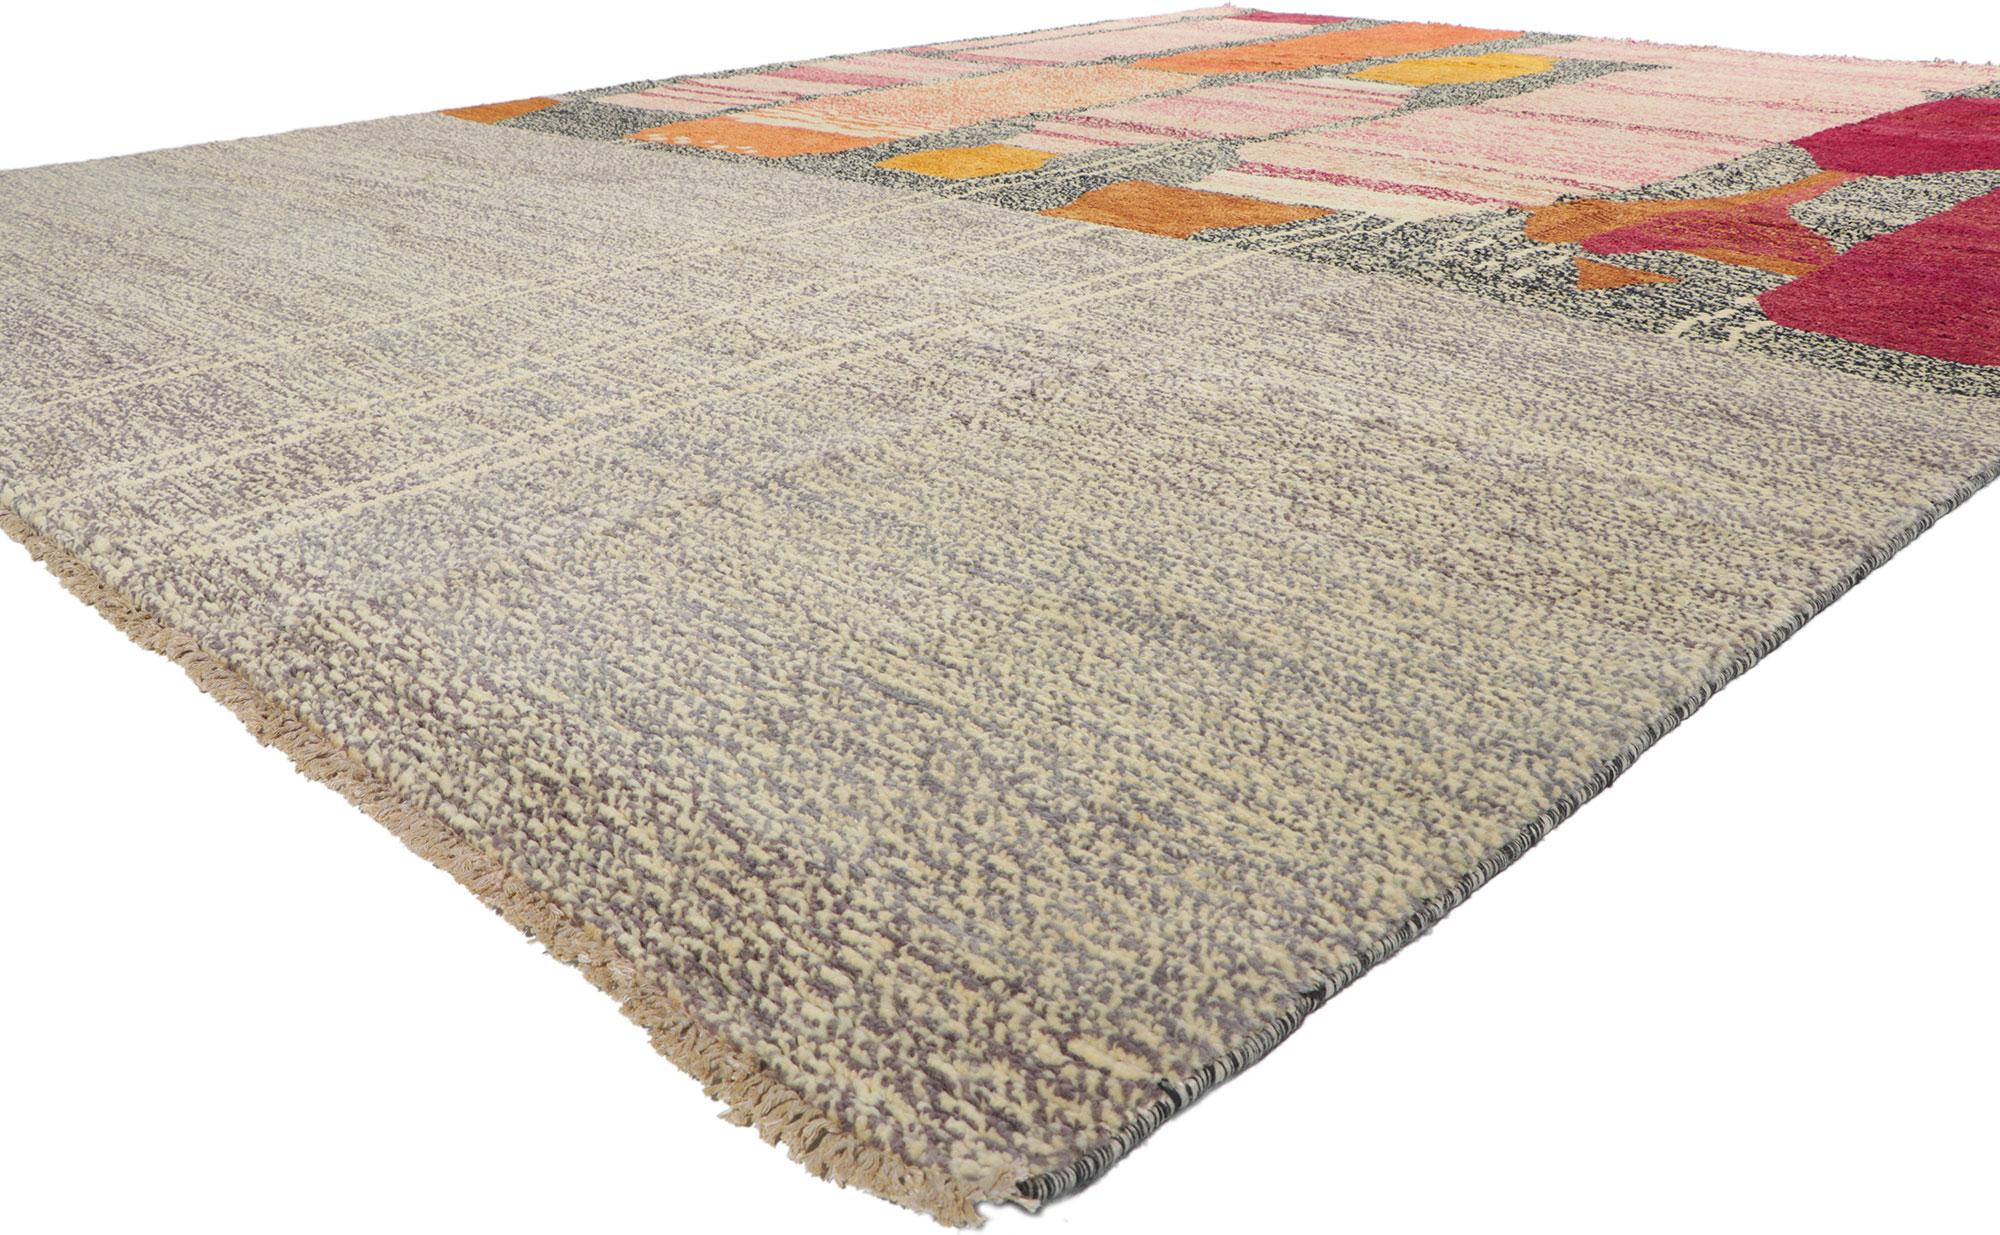 80696 New Contemporary Moroccan Area rug with Post-Modern Style 10'05 x 13'09. Showcasing an expressive design, incredible detail and texture, this hand knotted wool contemporary Moroccan area rug is a captivating vision of woven beauty. The bold